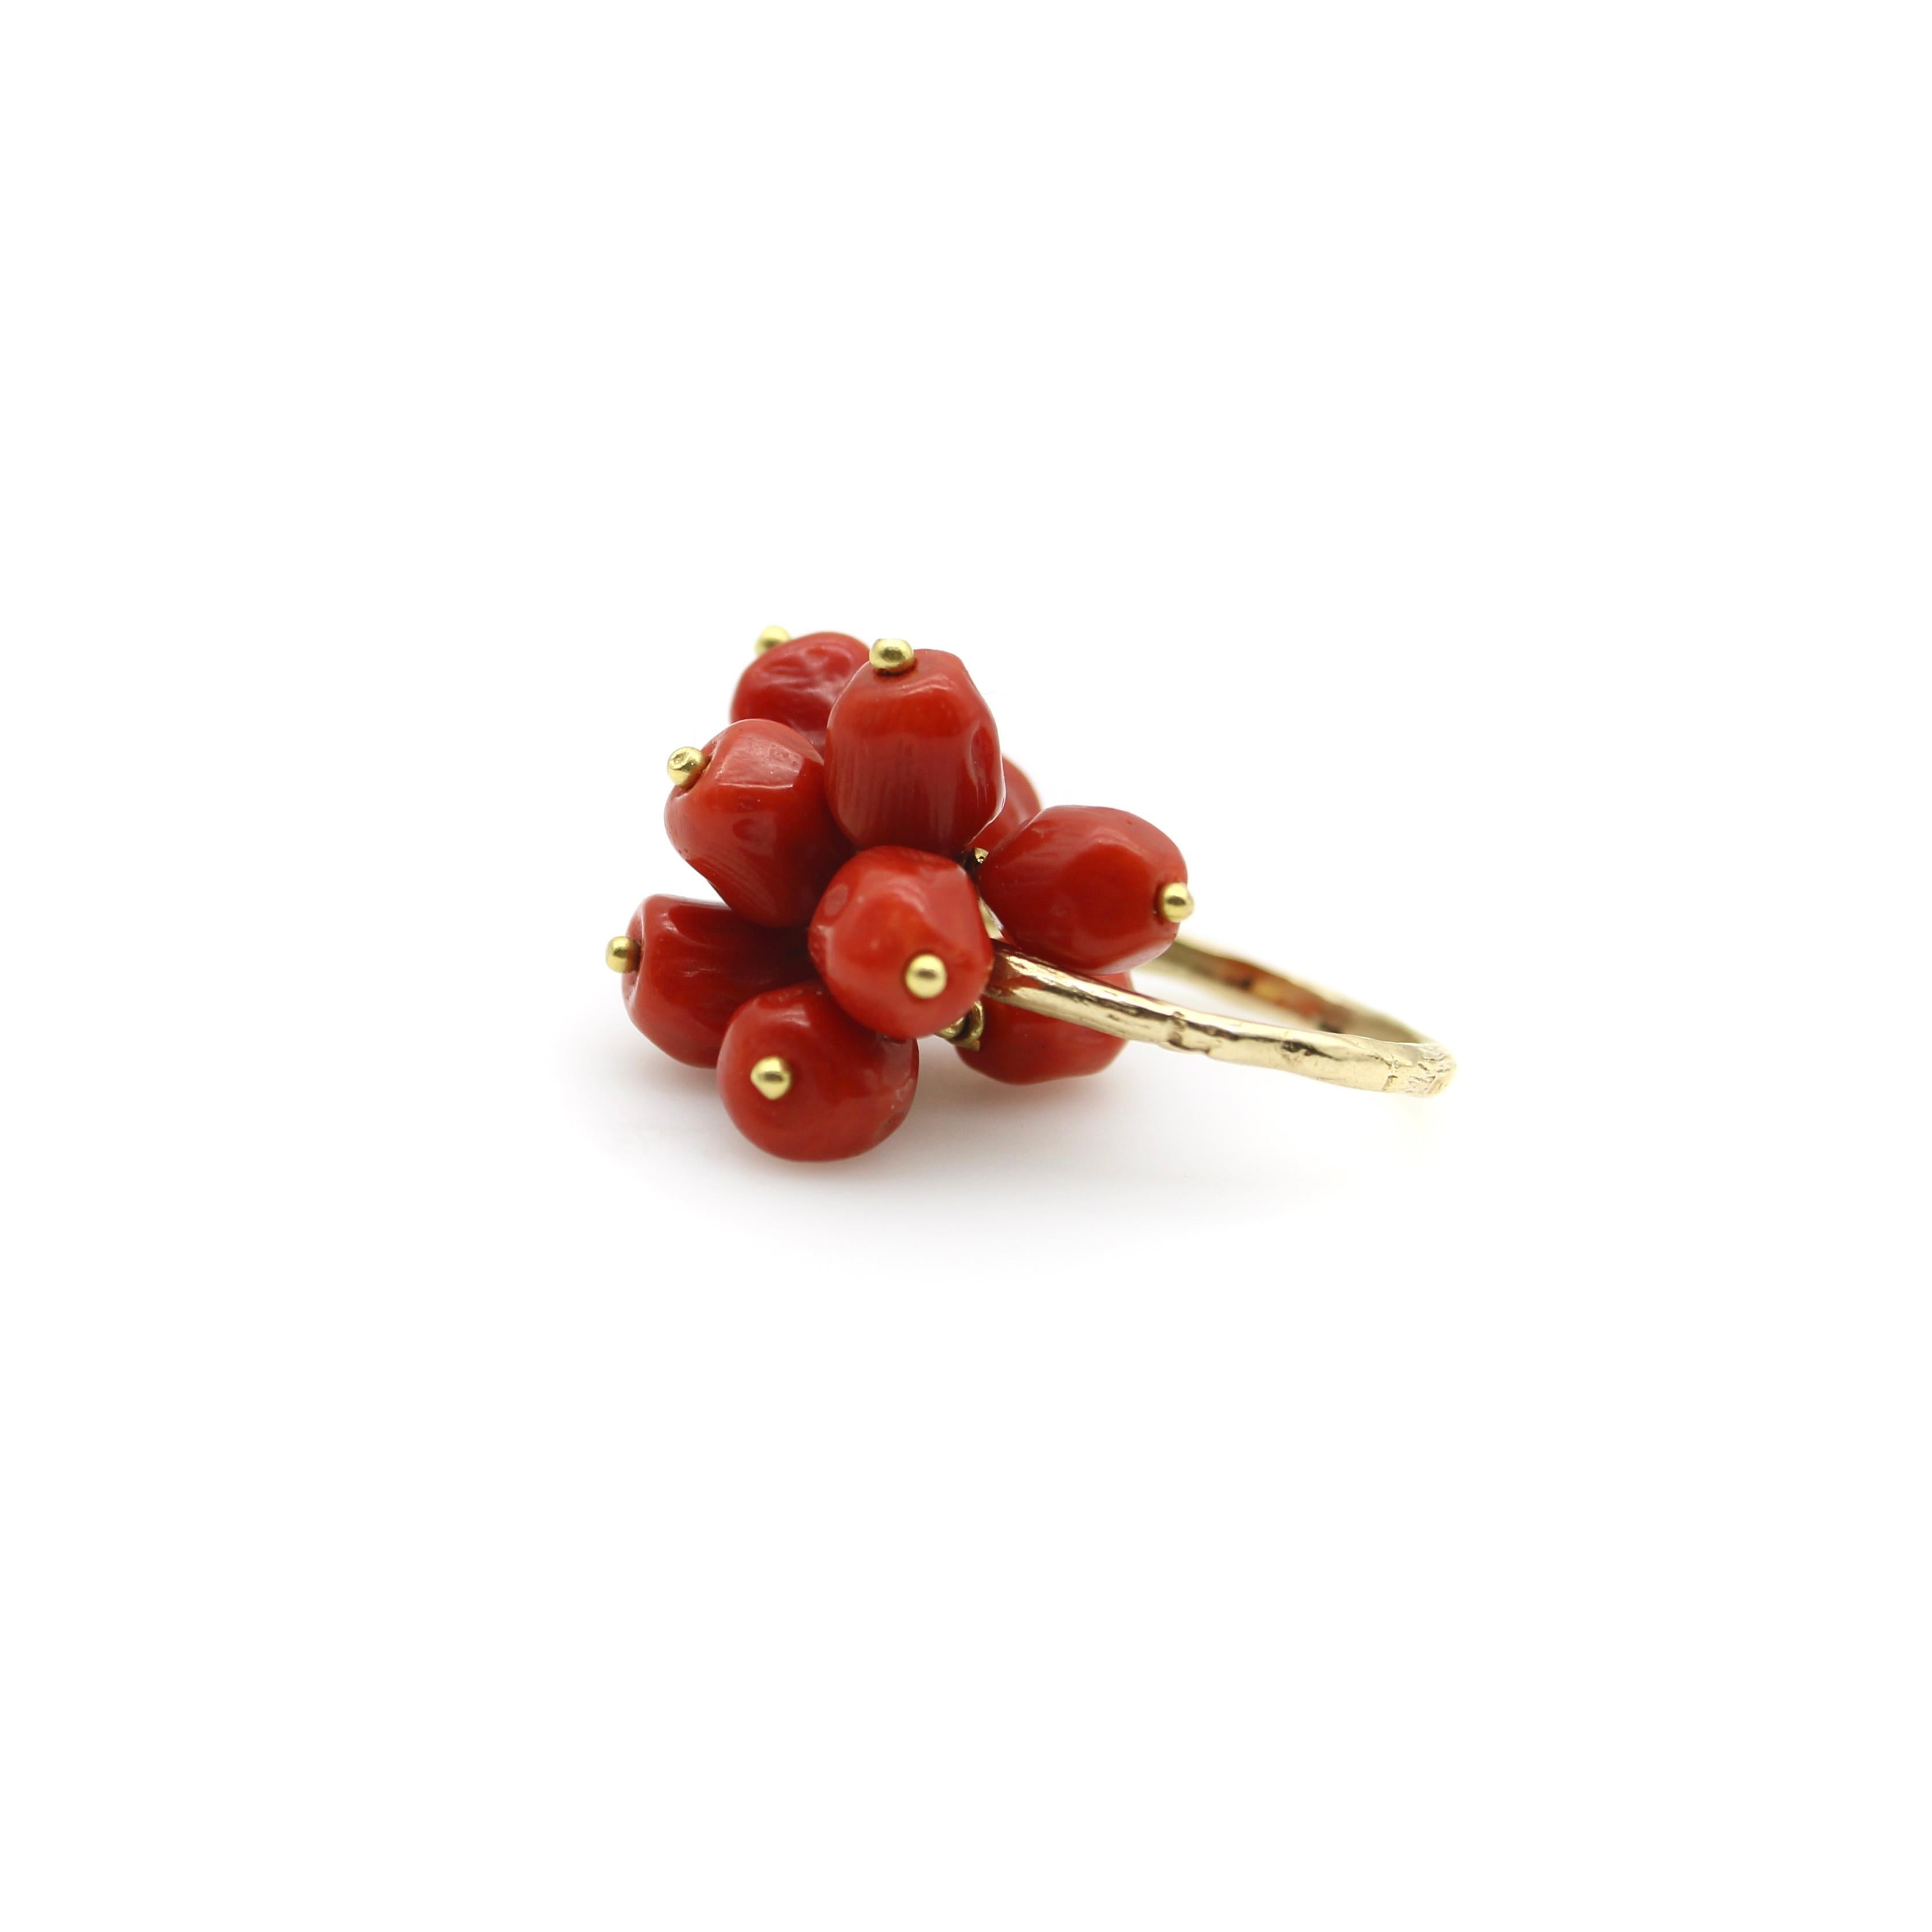 This vintage 18k gold ring features a cluster of deep red, faceted coral beads. The beads are held in place by gold wire, wrapped around the top center of the band—allowing for movement. The ring is playful and perfect for summer, and the coral